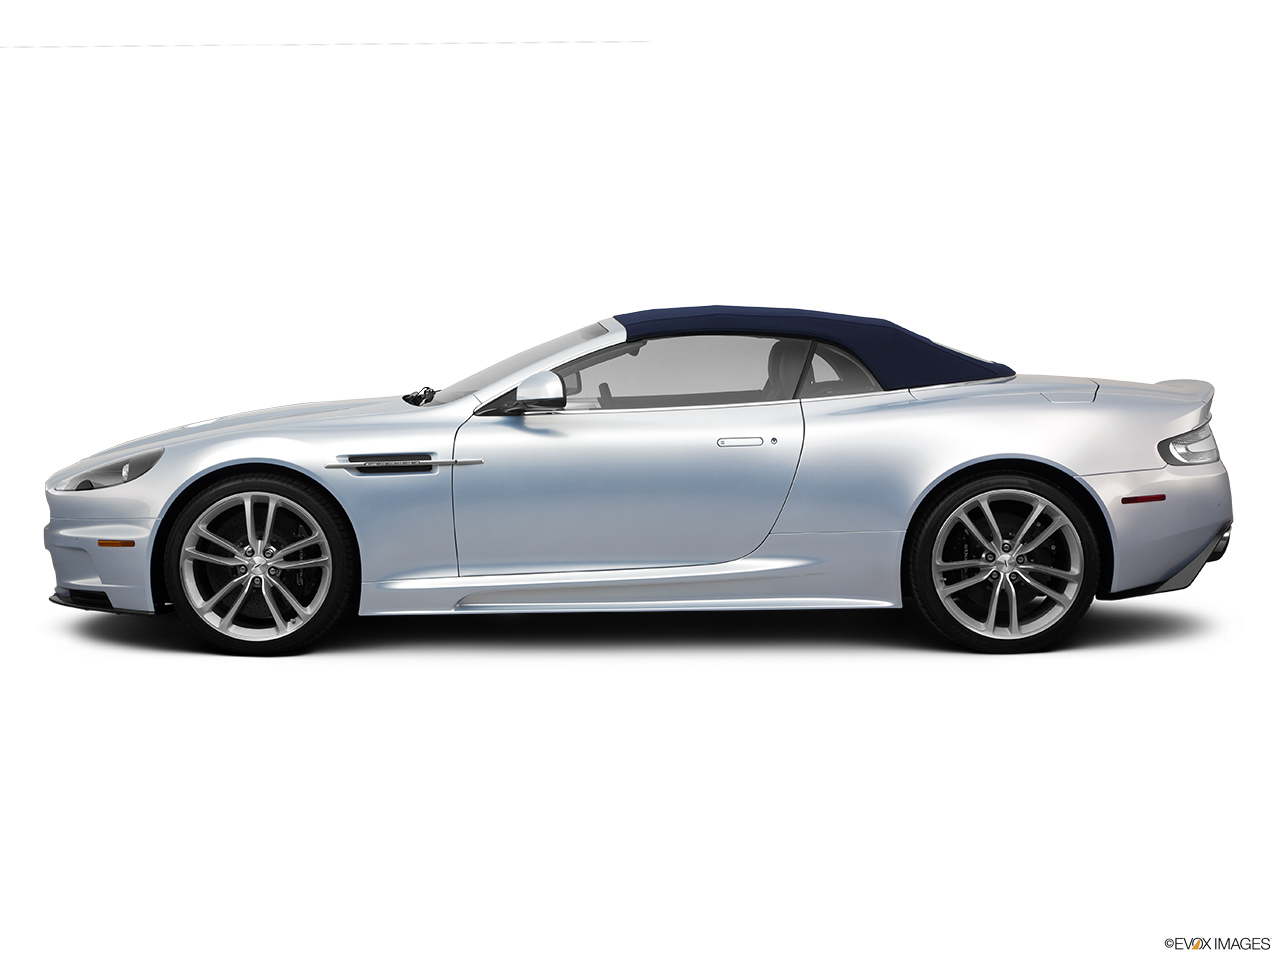 2011 Aston Martin DBS Volante Drivers side profile, convertible top up (convertibles only). 